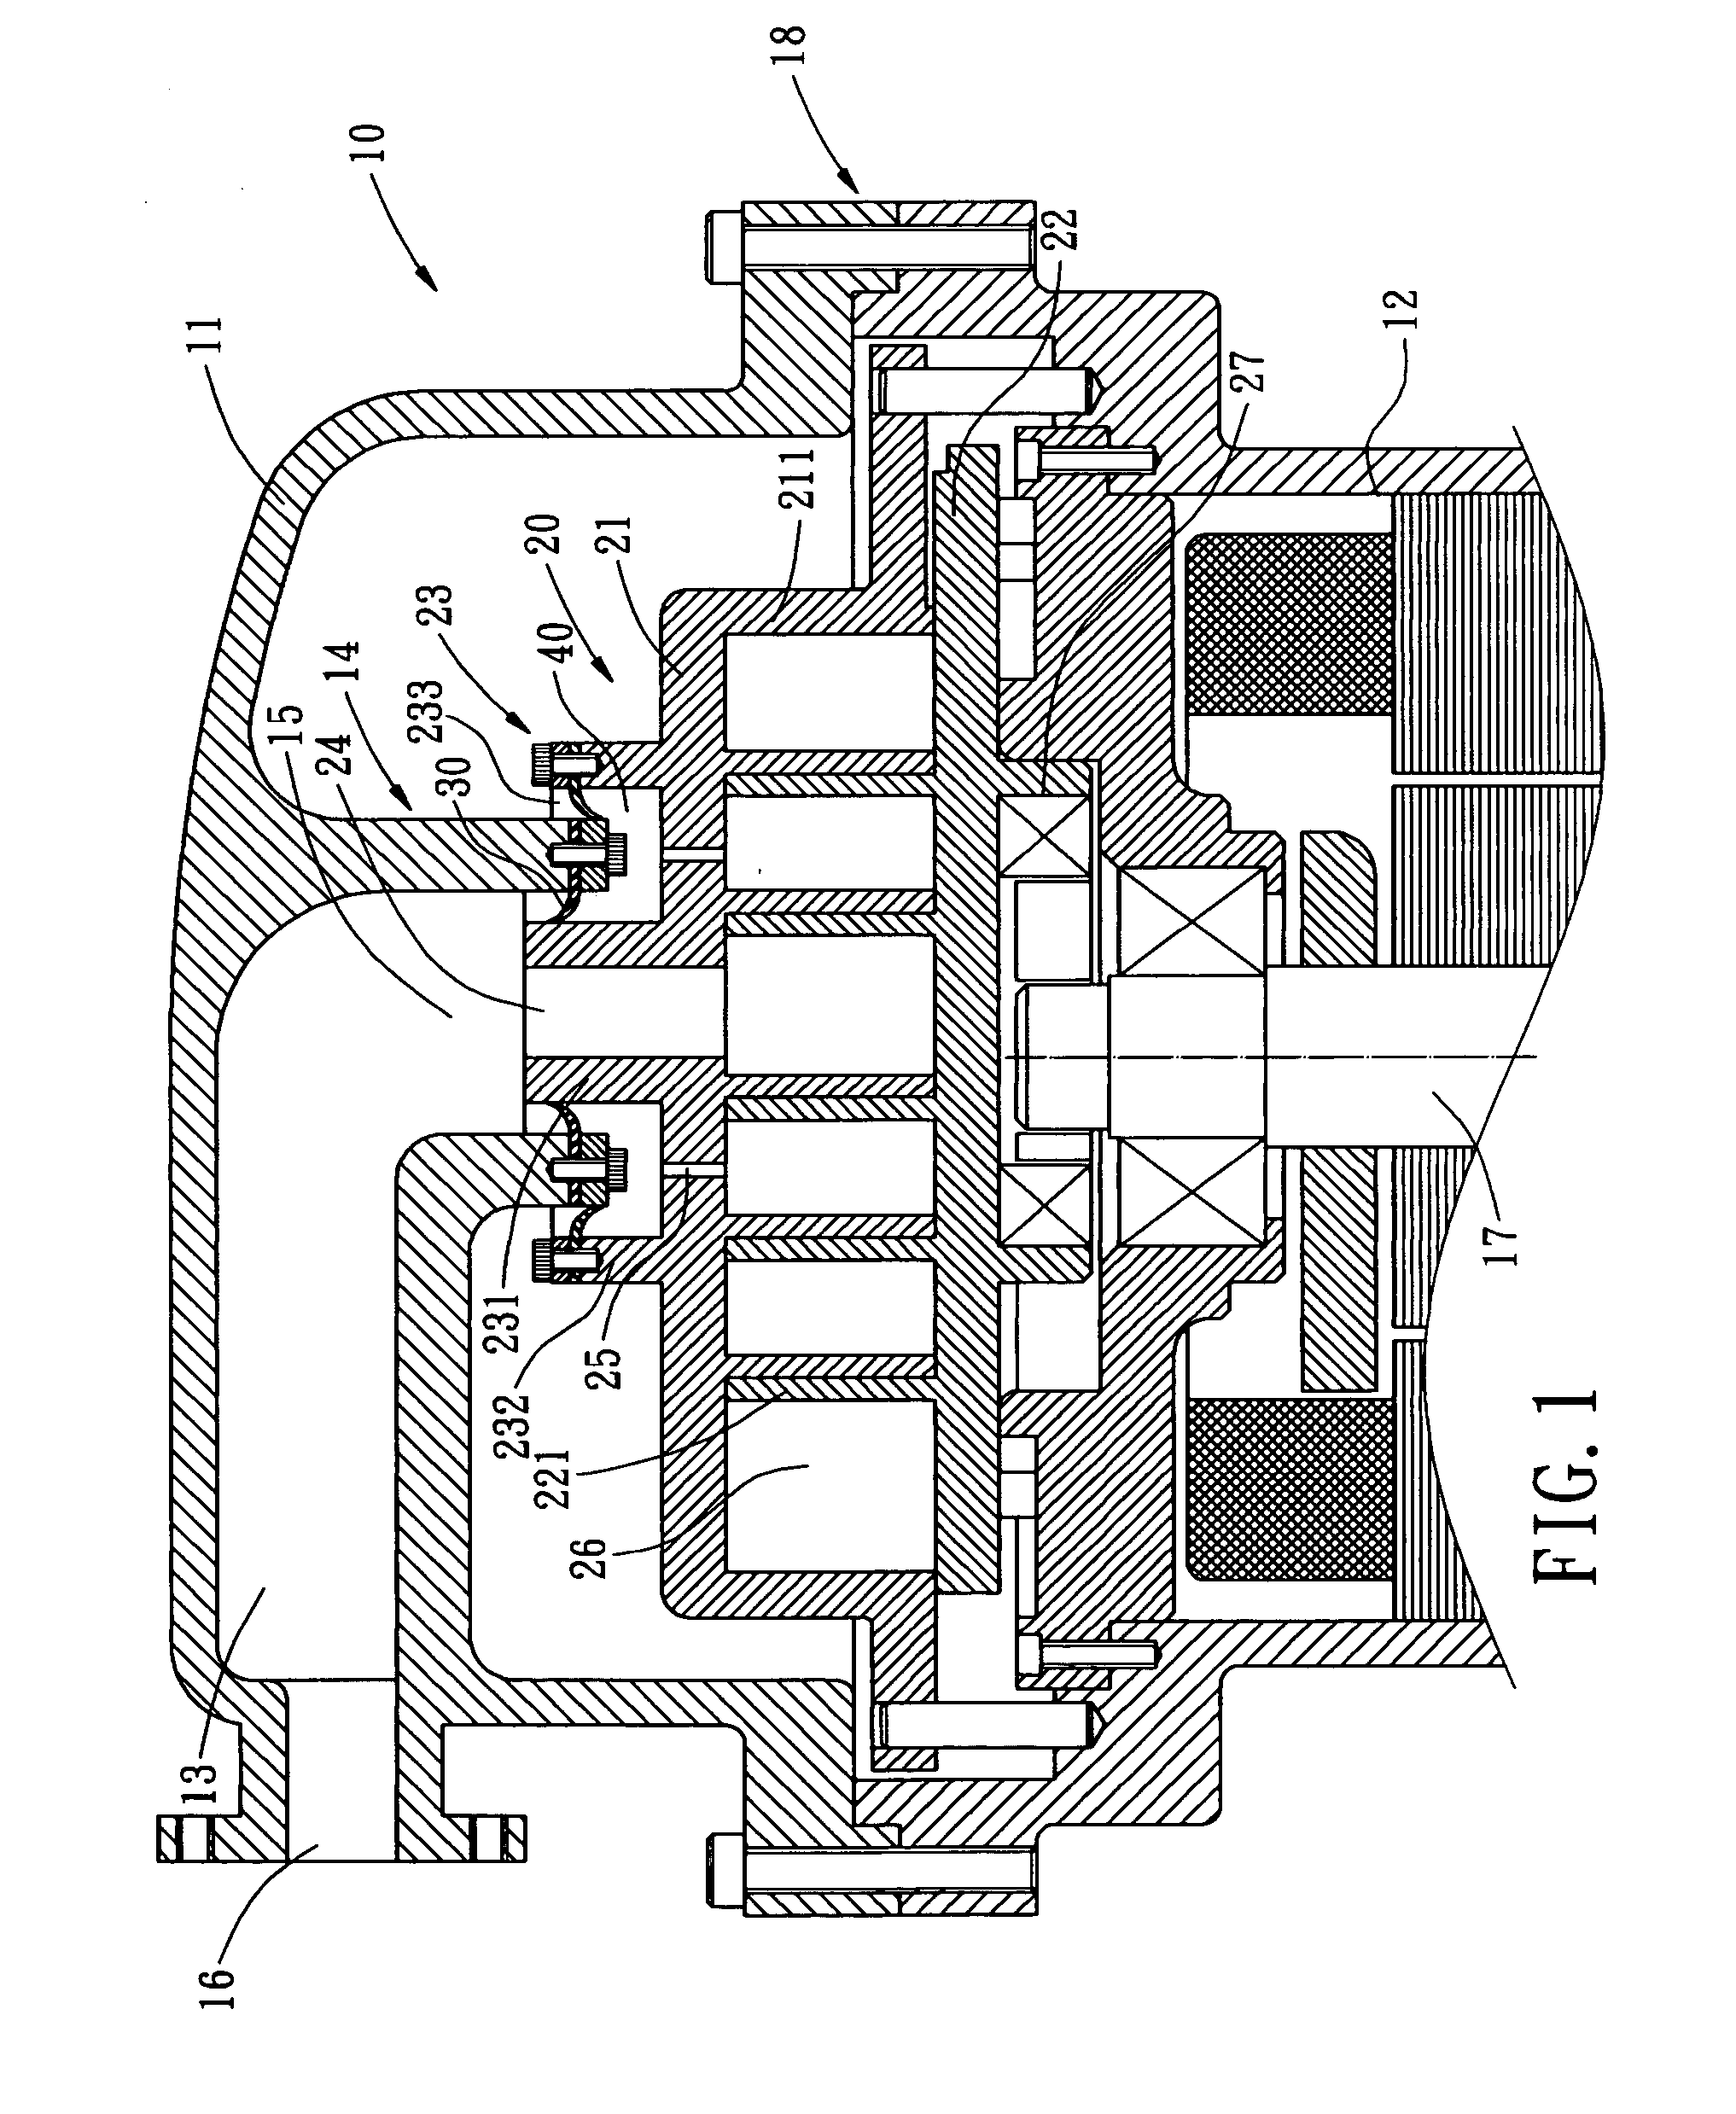 Axial compliance mechanism of scroll compressor